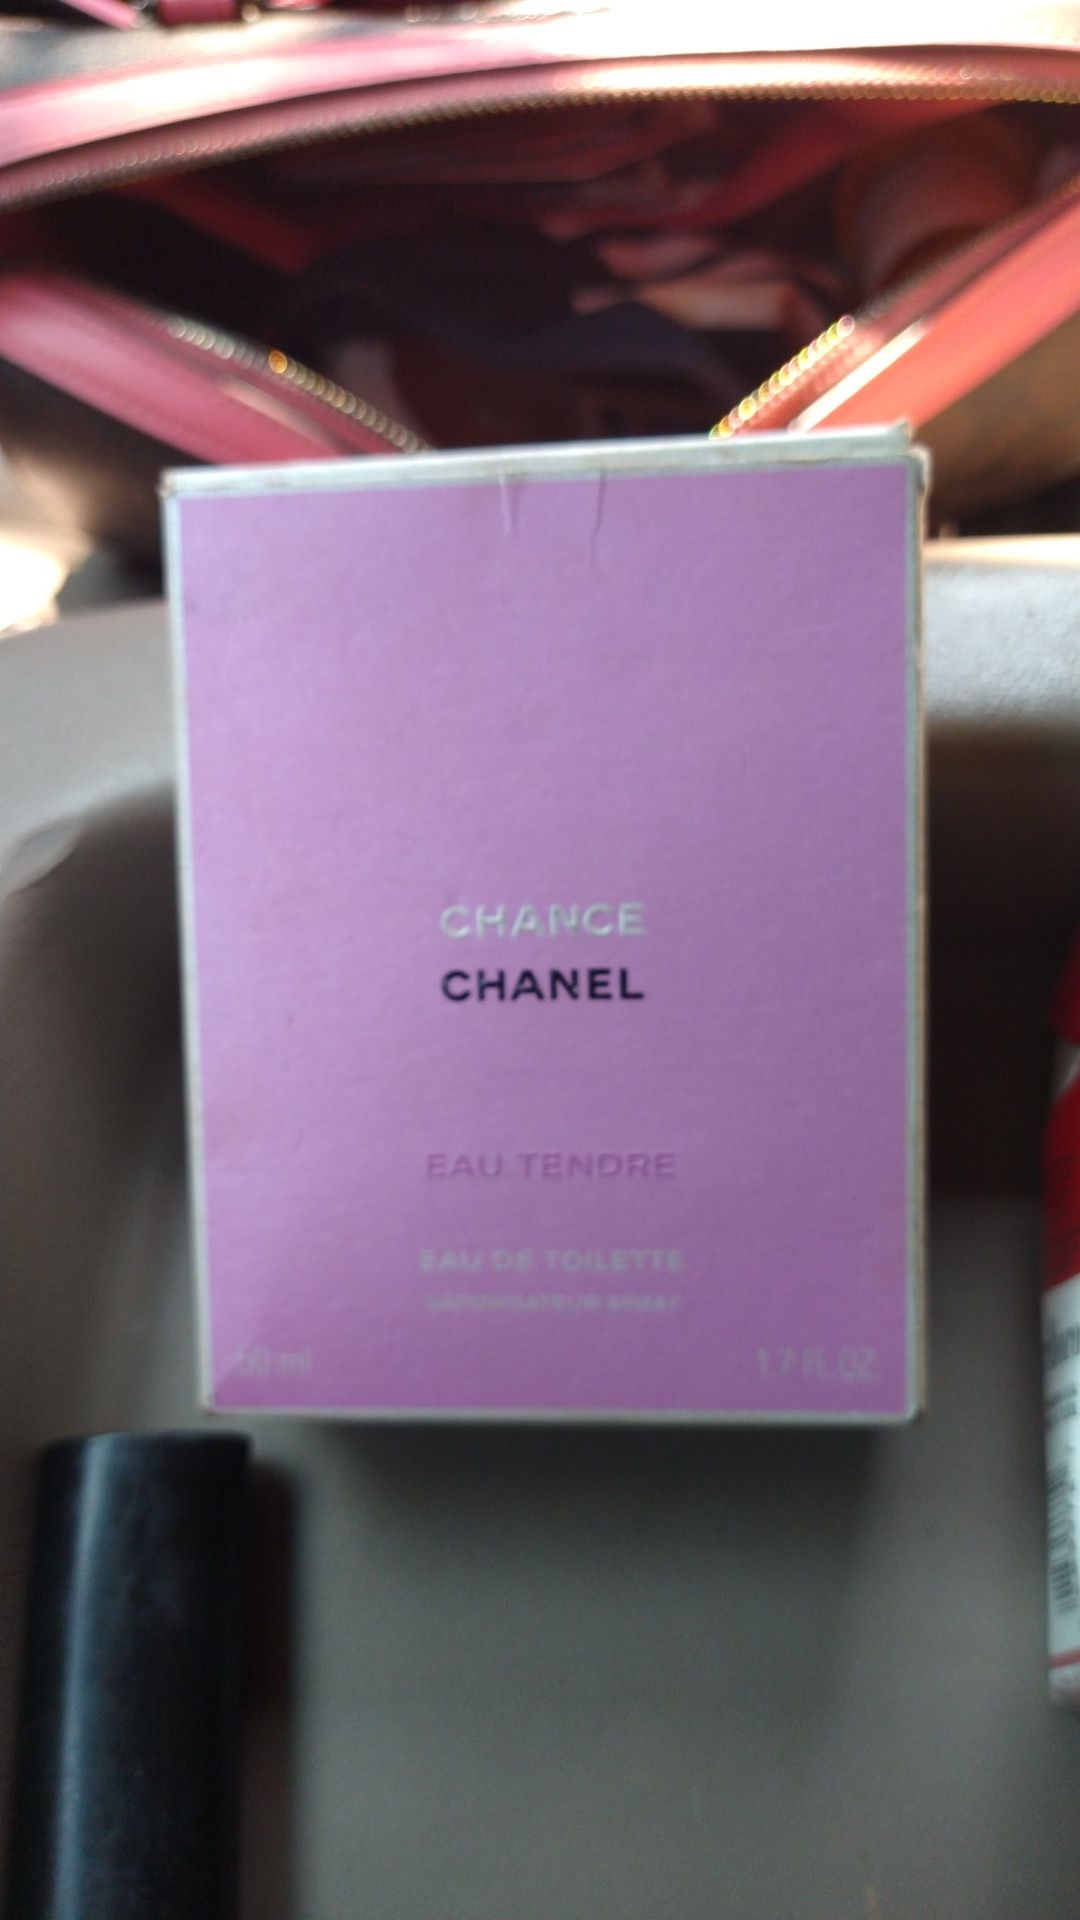 Chance by Chanel perfume